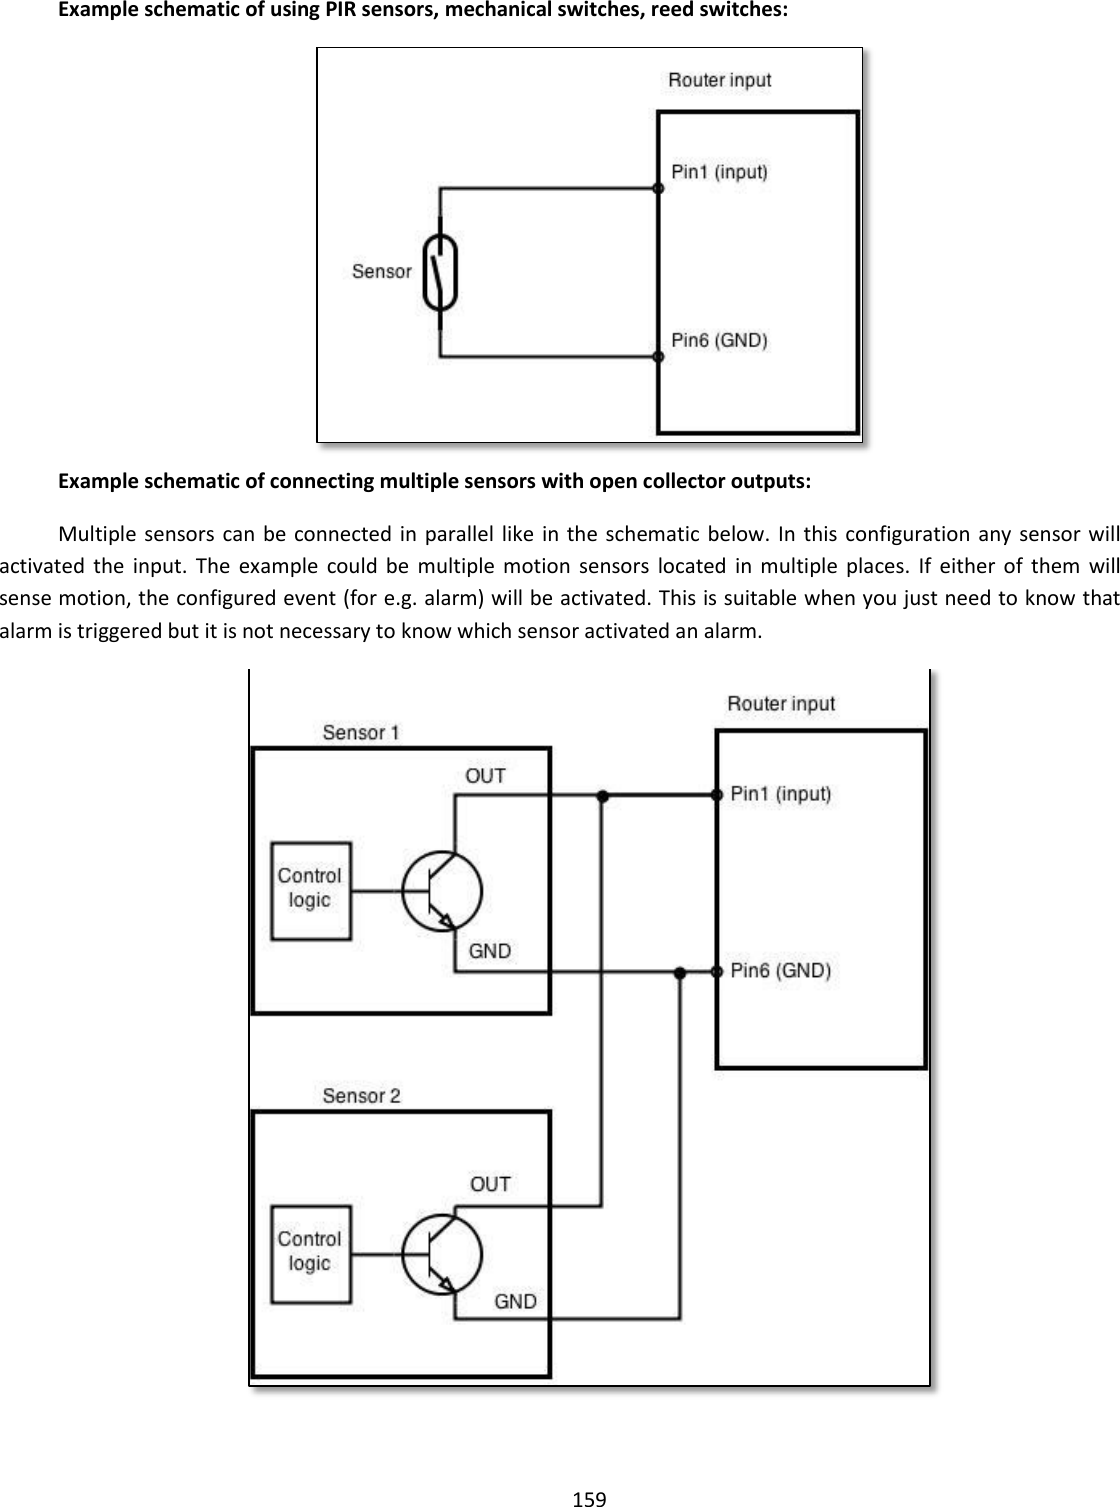  159    Example schematic of using PIR sensors, mechanical switches, reed switches:  Example schematic of connecting multiple sensors with open collector outputs: Multiple sensors can  be connected in parallel like  in the schematic  below. In  this configuration any sensor  will activated  the  input.  The  example  could be  multiple motion  sensors  located  in  multiple  places.  If  either of  them  will sense motion, the configured event (for e.g. alarm) will be activated. This is suitable when you just need to know that alarm is triggered but it is not necessary to know which sensor activated an alarm.  